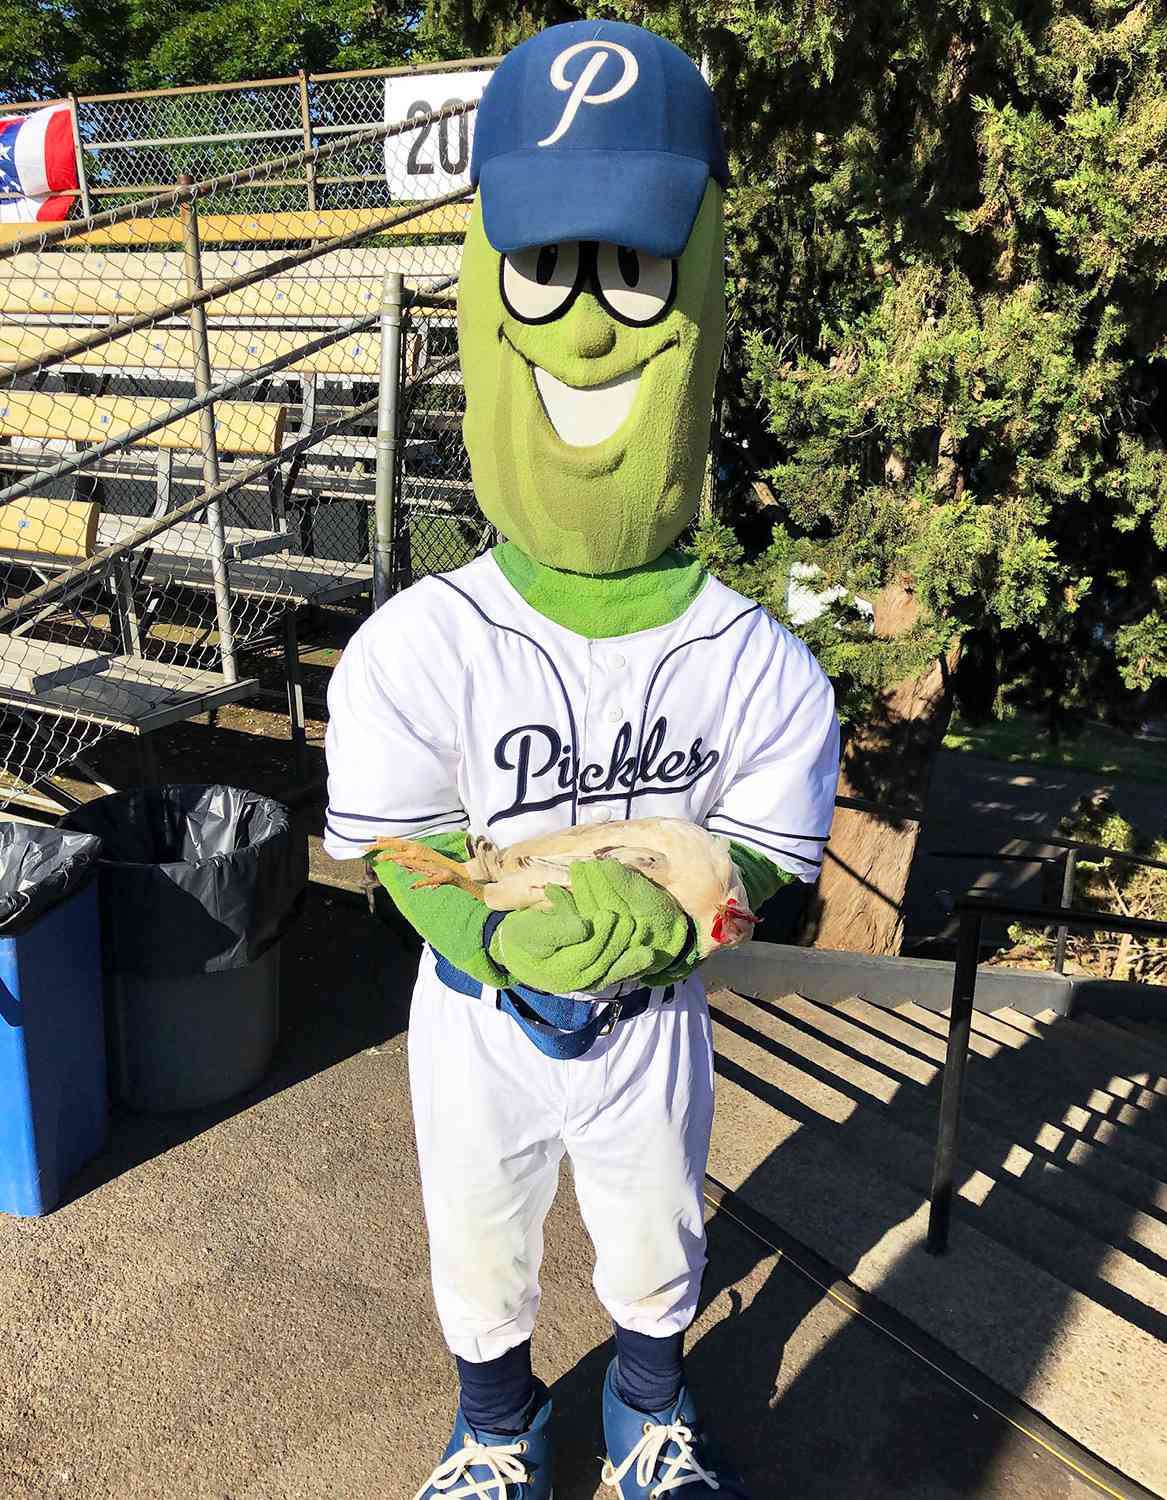 Portland Baseball Team in a Pickle After Mascot Posts Photo Fans Don't Think Is Kosher